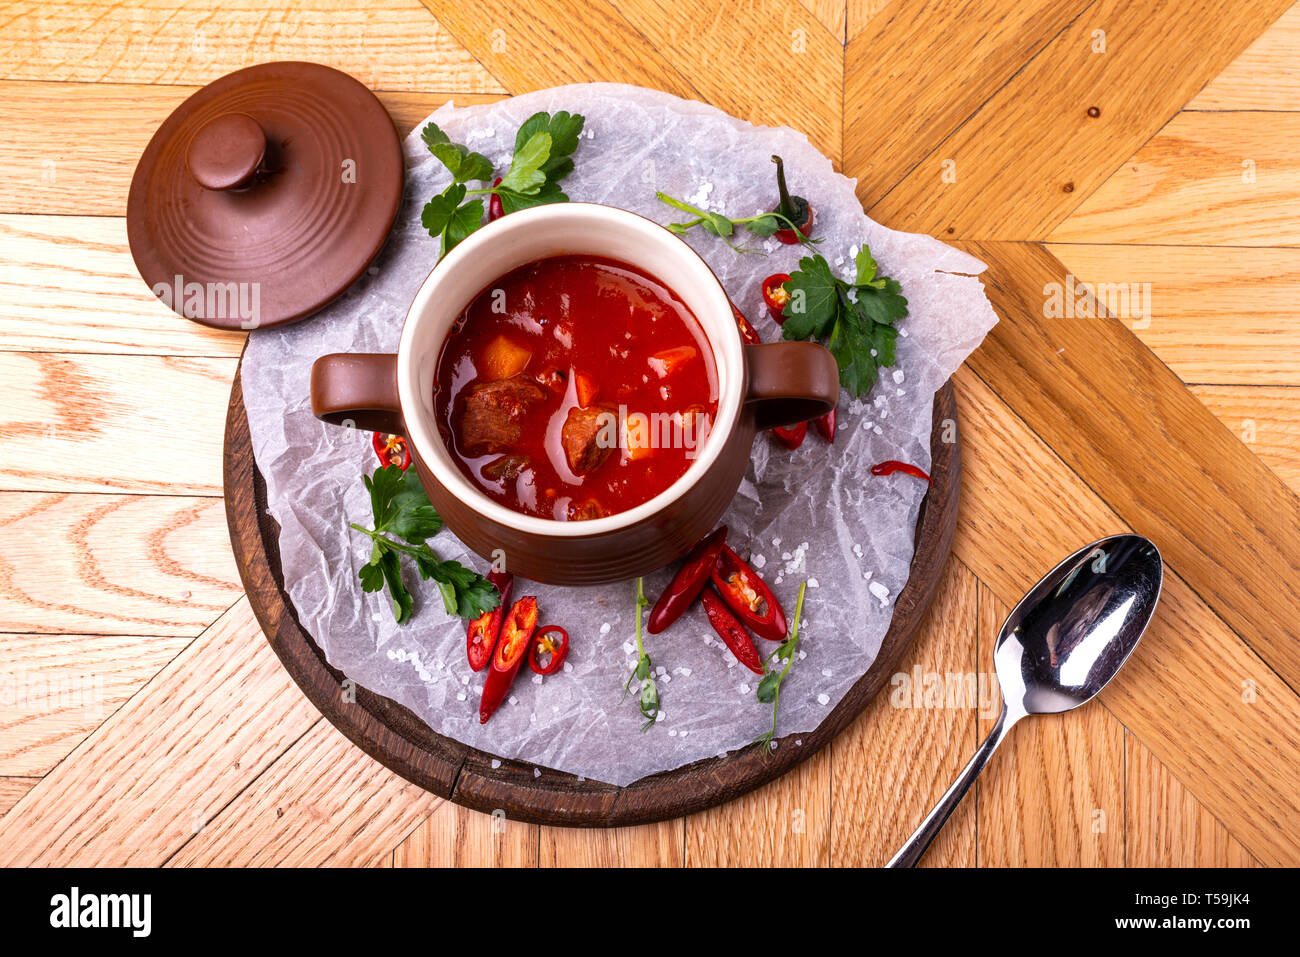 Tasty Hungarian Hot Goulash Soup Bograch or Gulas Lamb Meat Stew on Wooden Surface at Restaurant. Traditional Food. Stock Photo